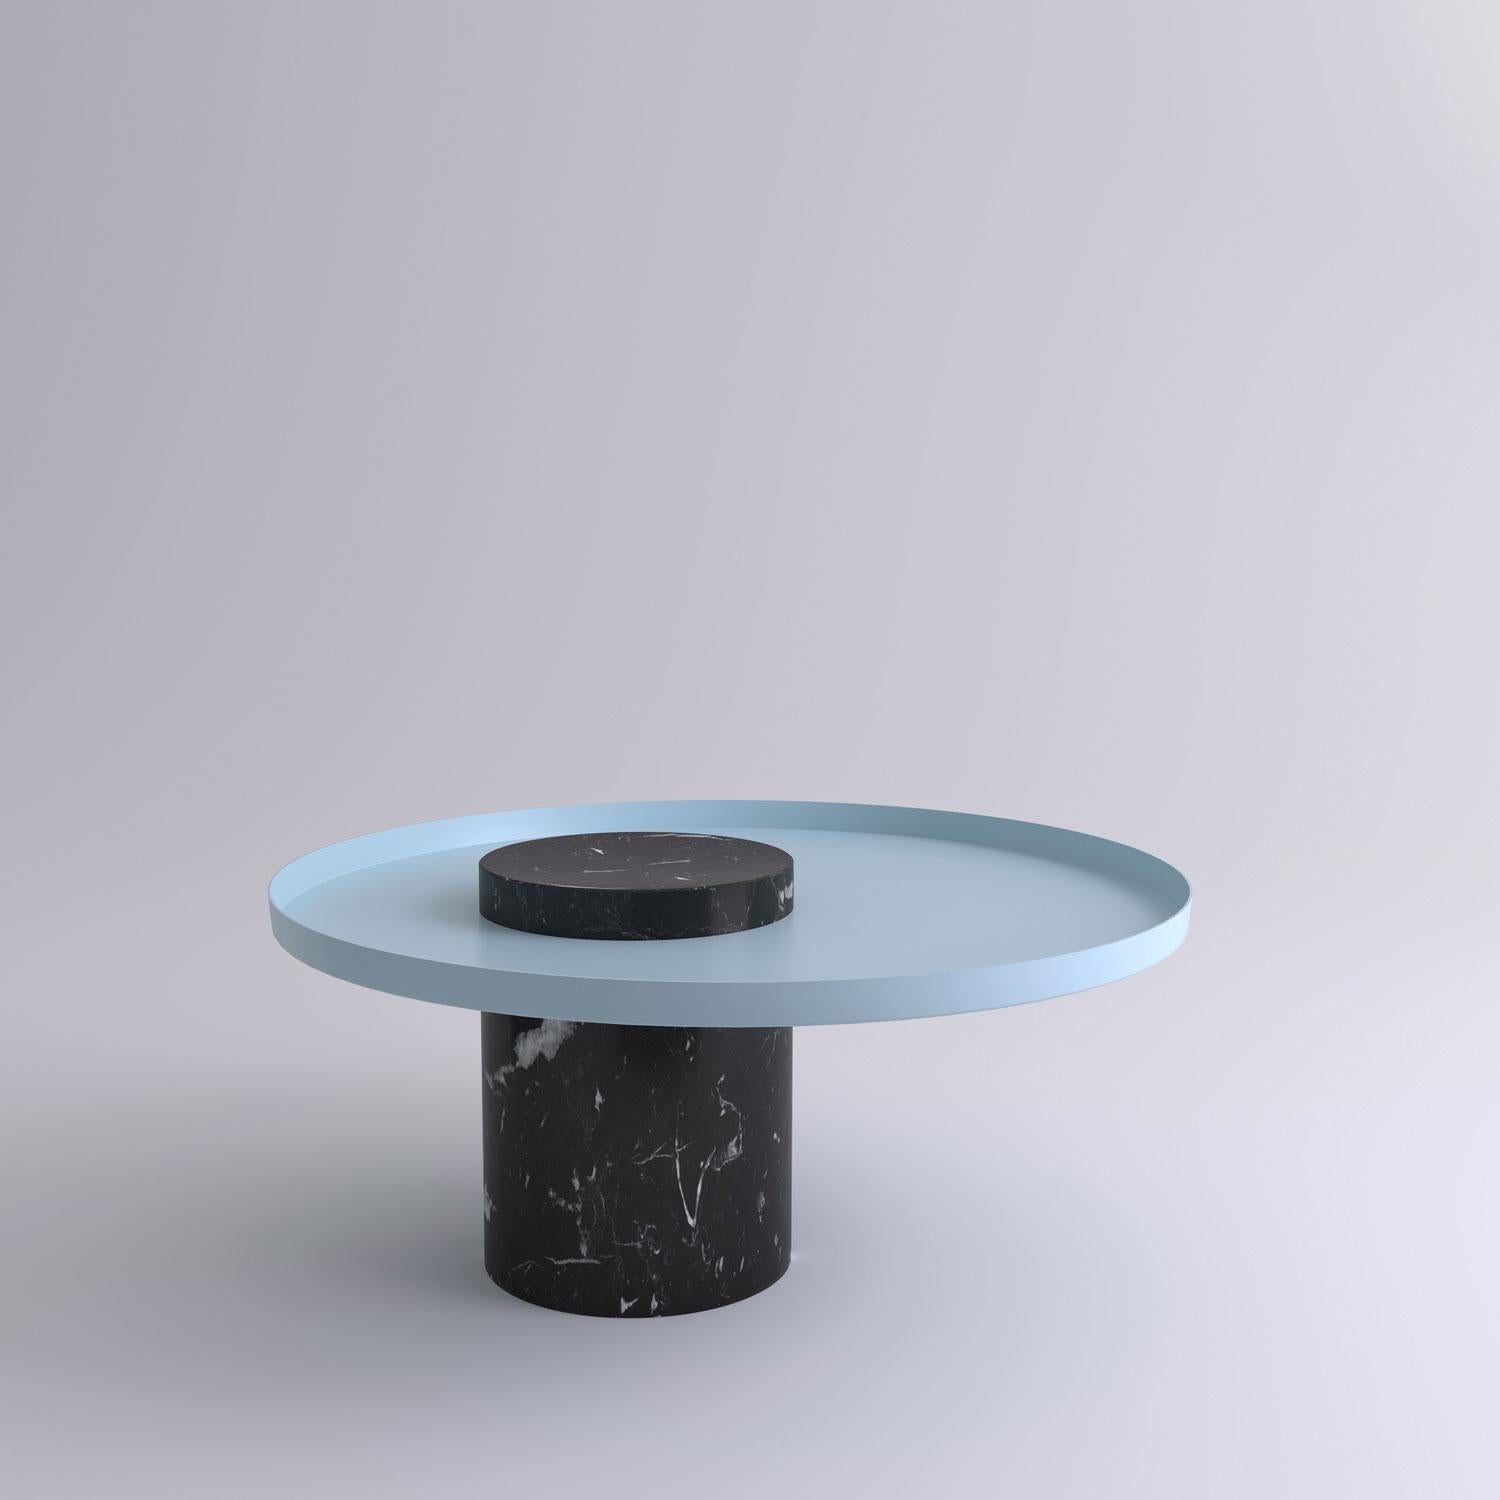 Low black marquina marble contemporary guéridon, Sebastian Herkner
Dimensions: D 70 x H 33 cm.
Materials: black marquina marble, light blue metal tray

The salute table exists in 3 sizes, 4 different marble stones for the column and 5 different